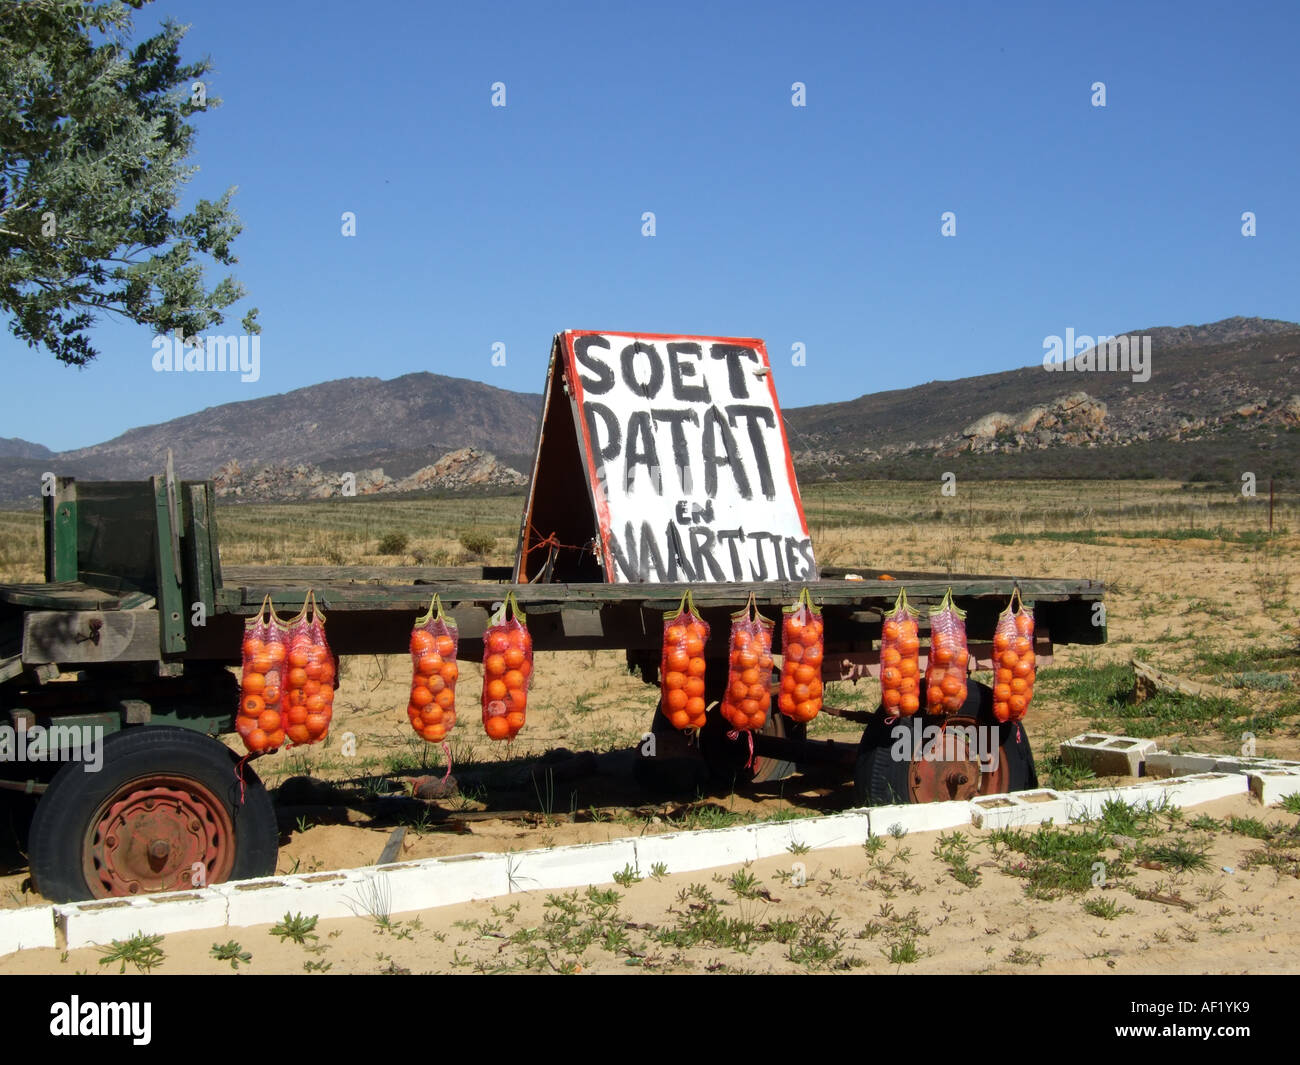 Citrusdal South Africa RSA. Oranges produce on sale at the roadside from a farm trailer Stock Photo